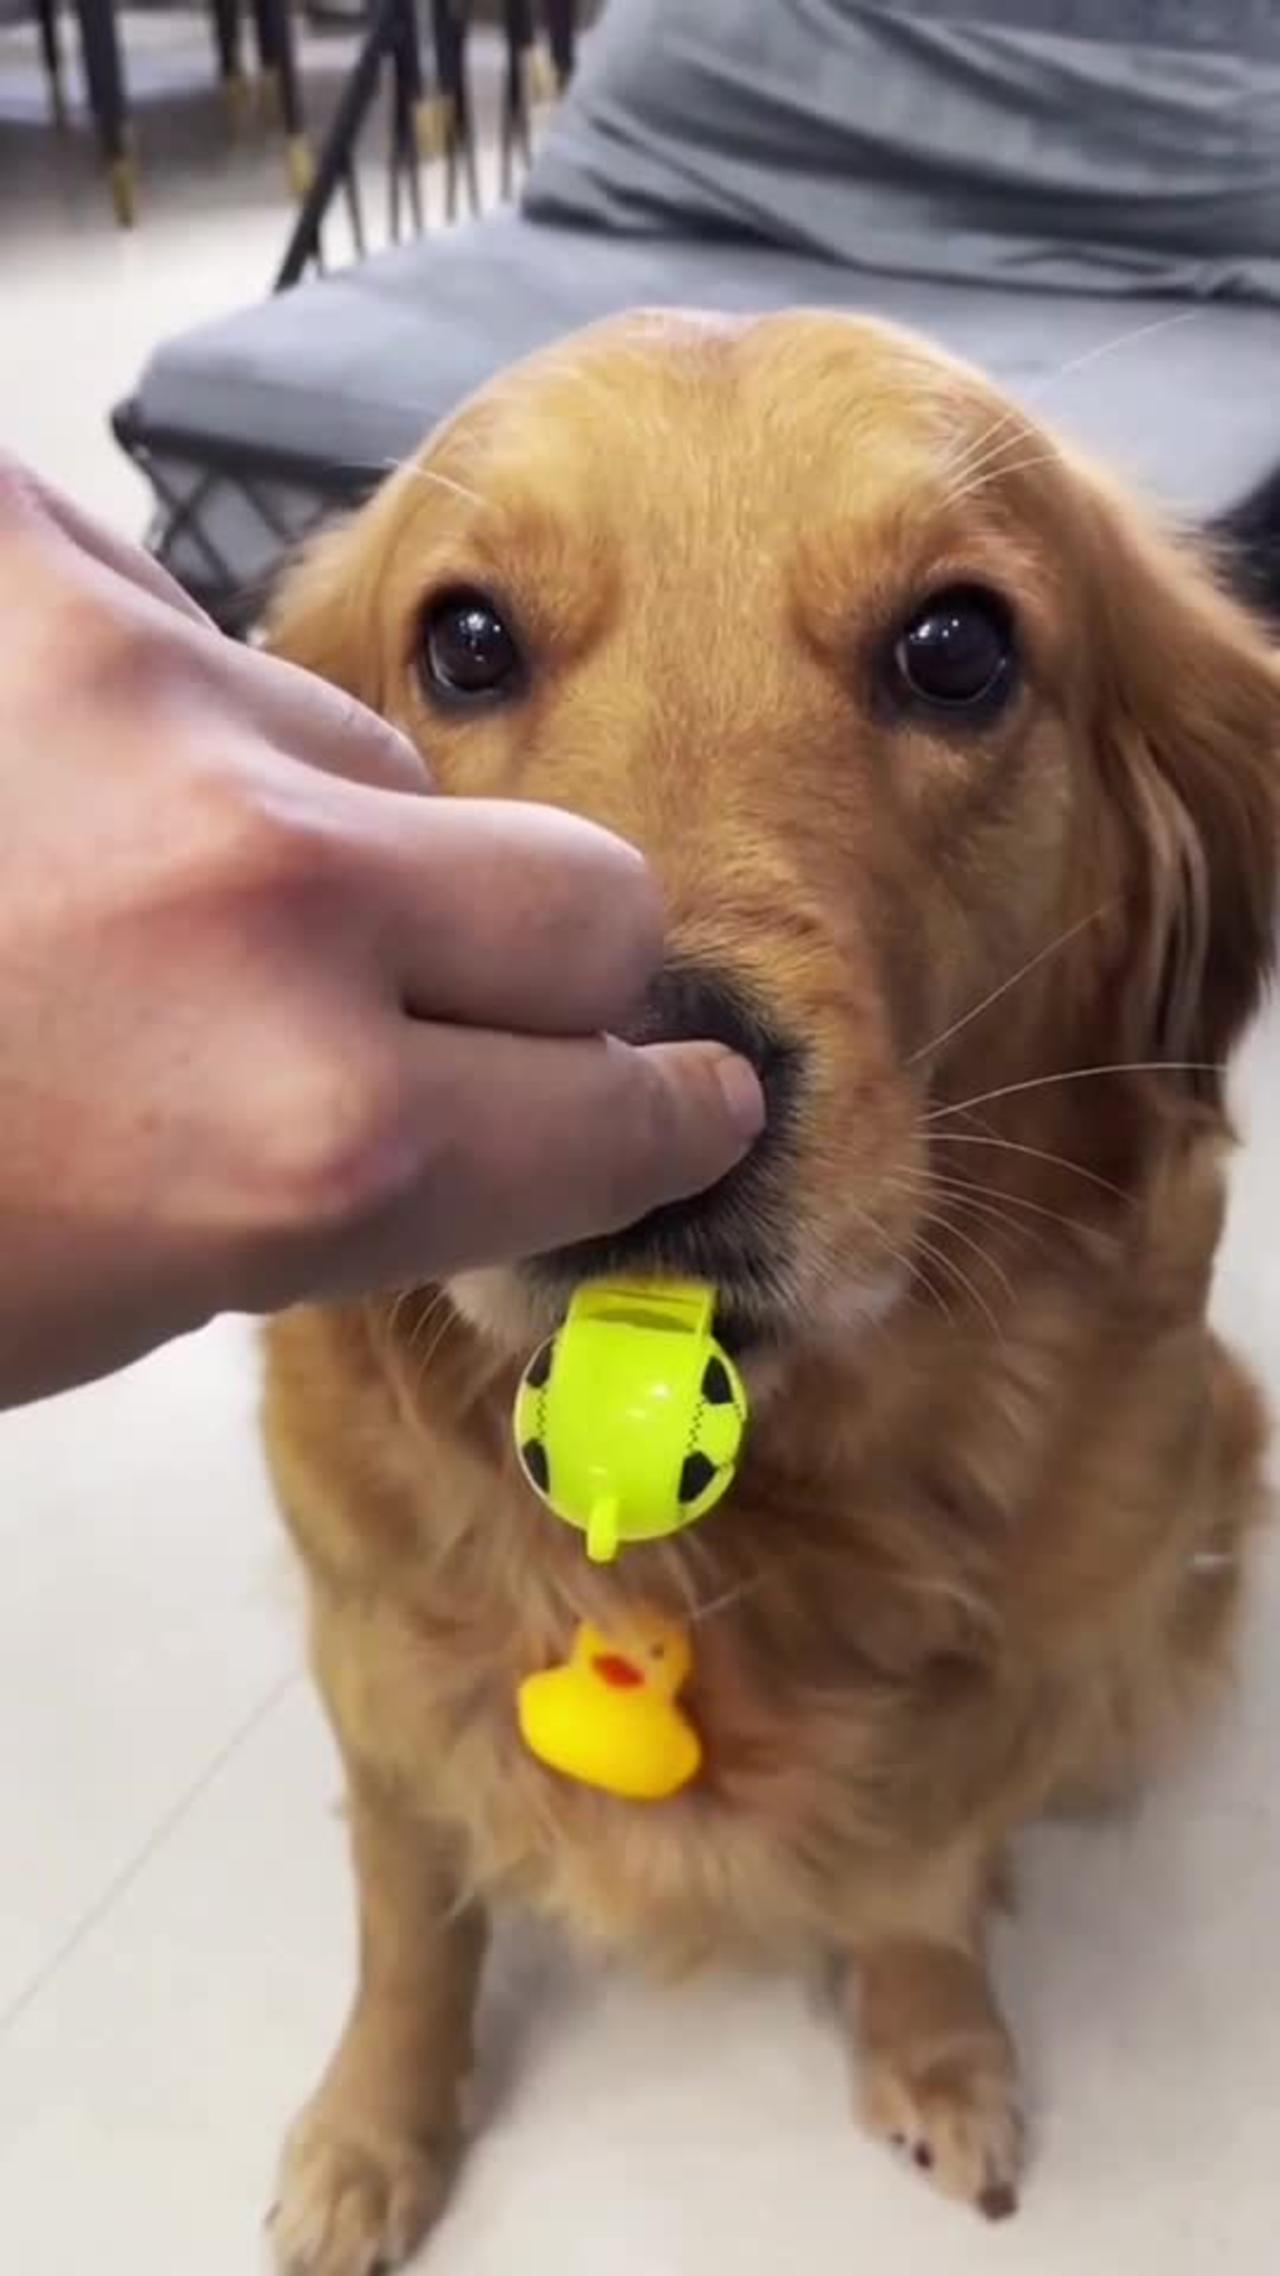 That's how a dog learns to blow a whistle!